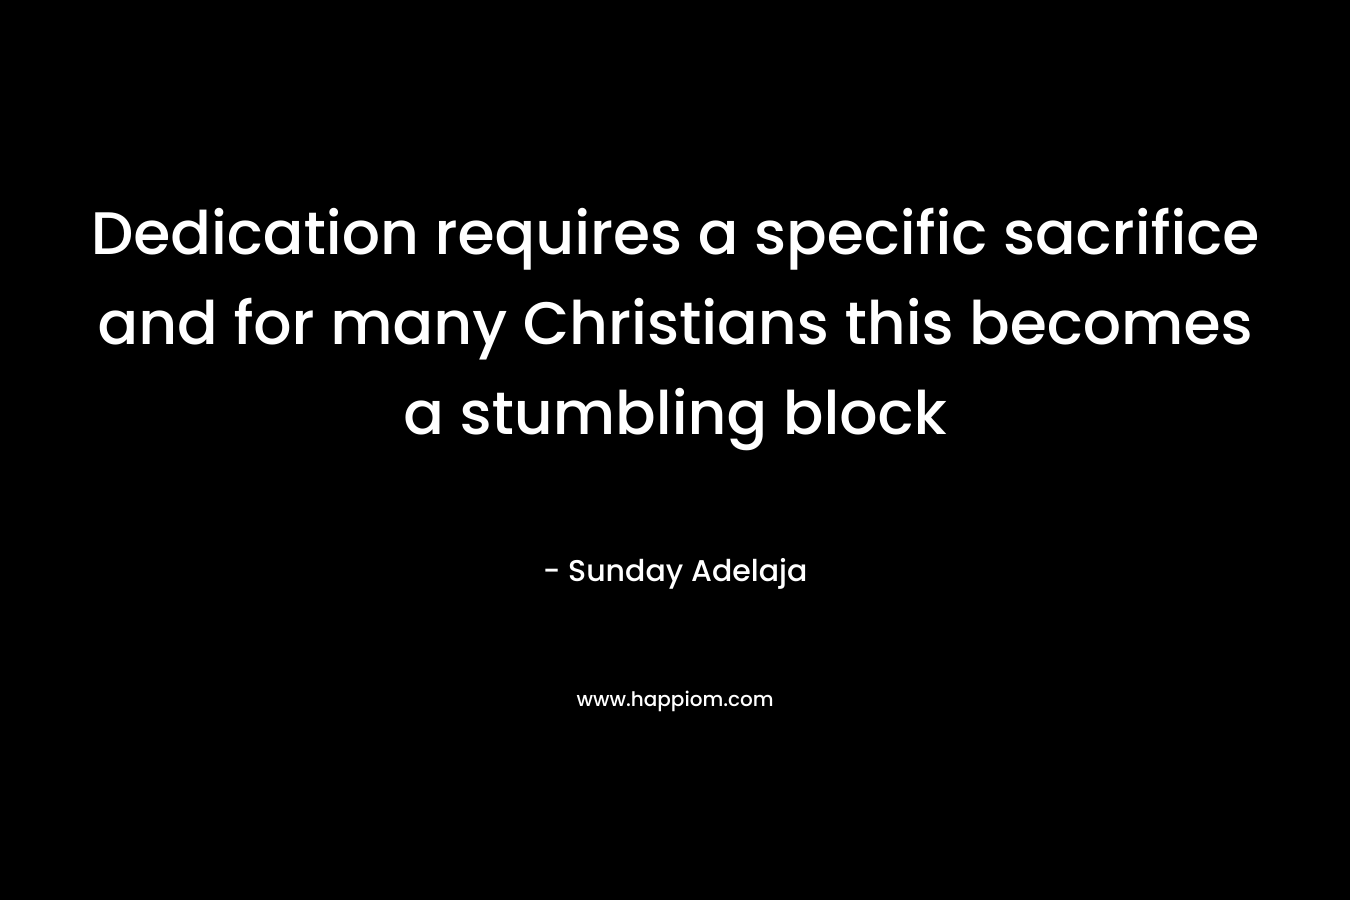 Dedication requires a specific sacrifice and for many Christians this becomes a stumbling block